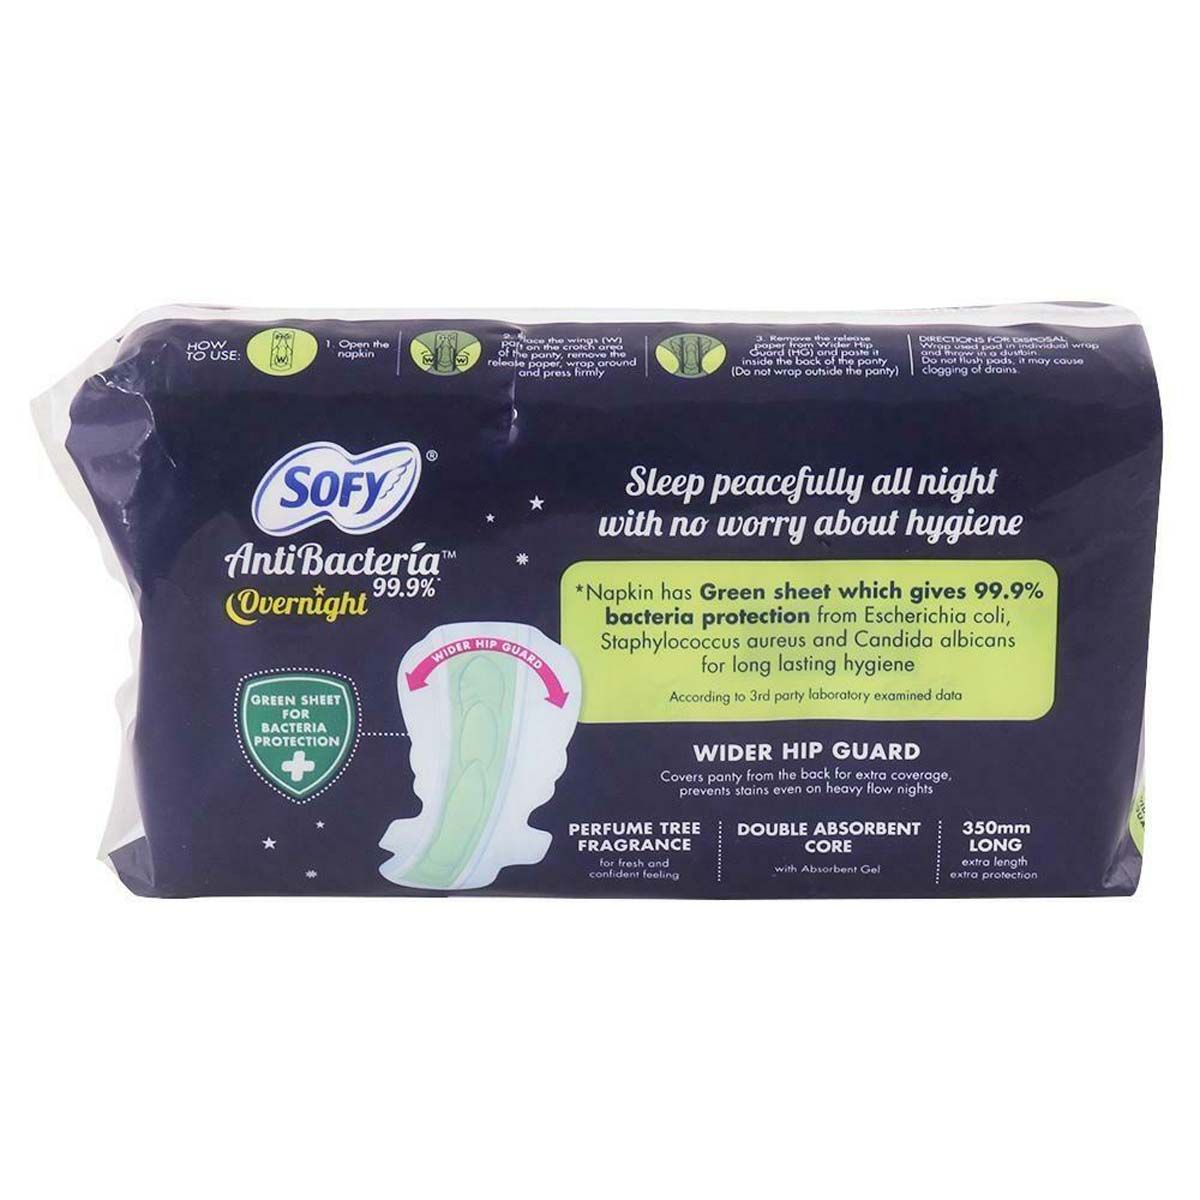 Sofy Bodyfit Overnight Pads XXL, 10 (2 x 5) Count, Pack of 2 S